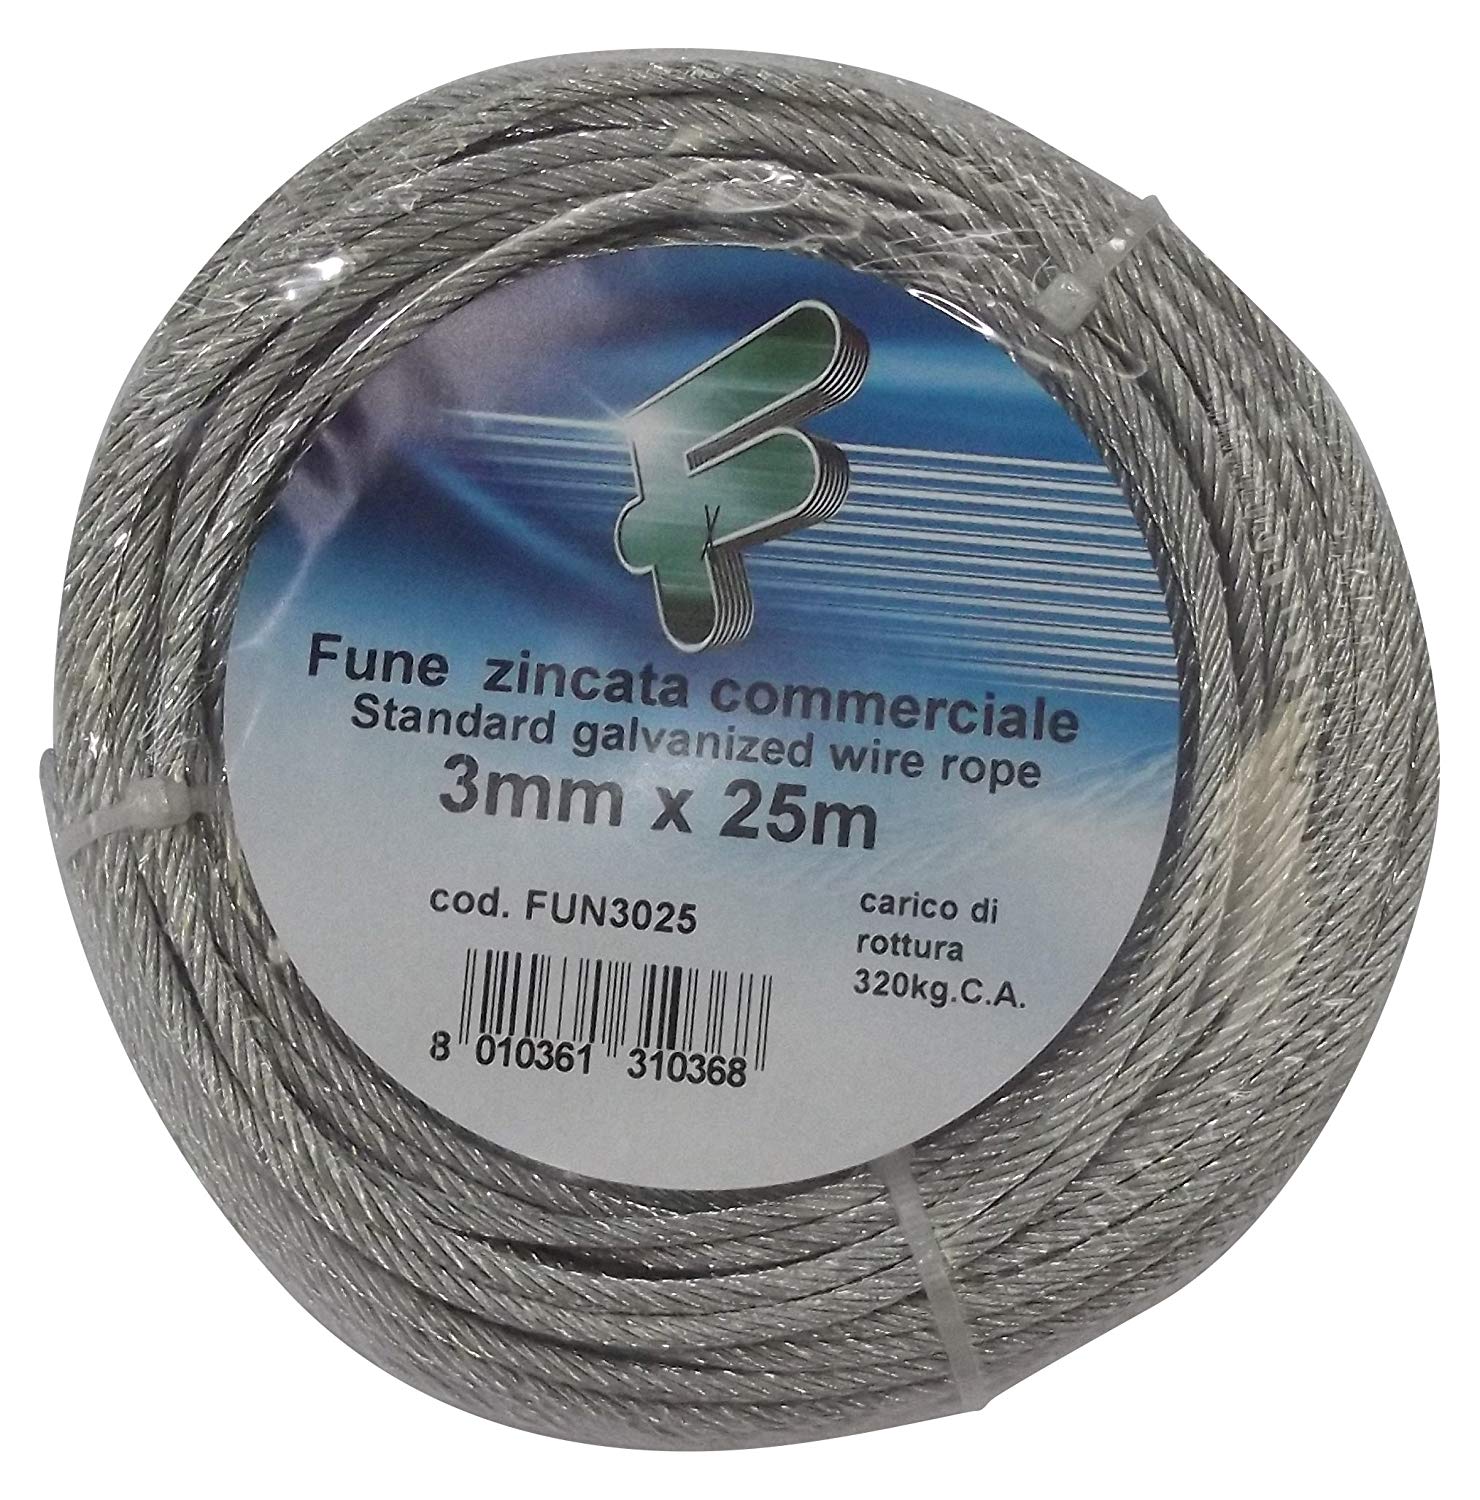 FILOMAT WIRE ROPE 3mm 25M